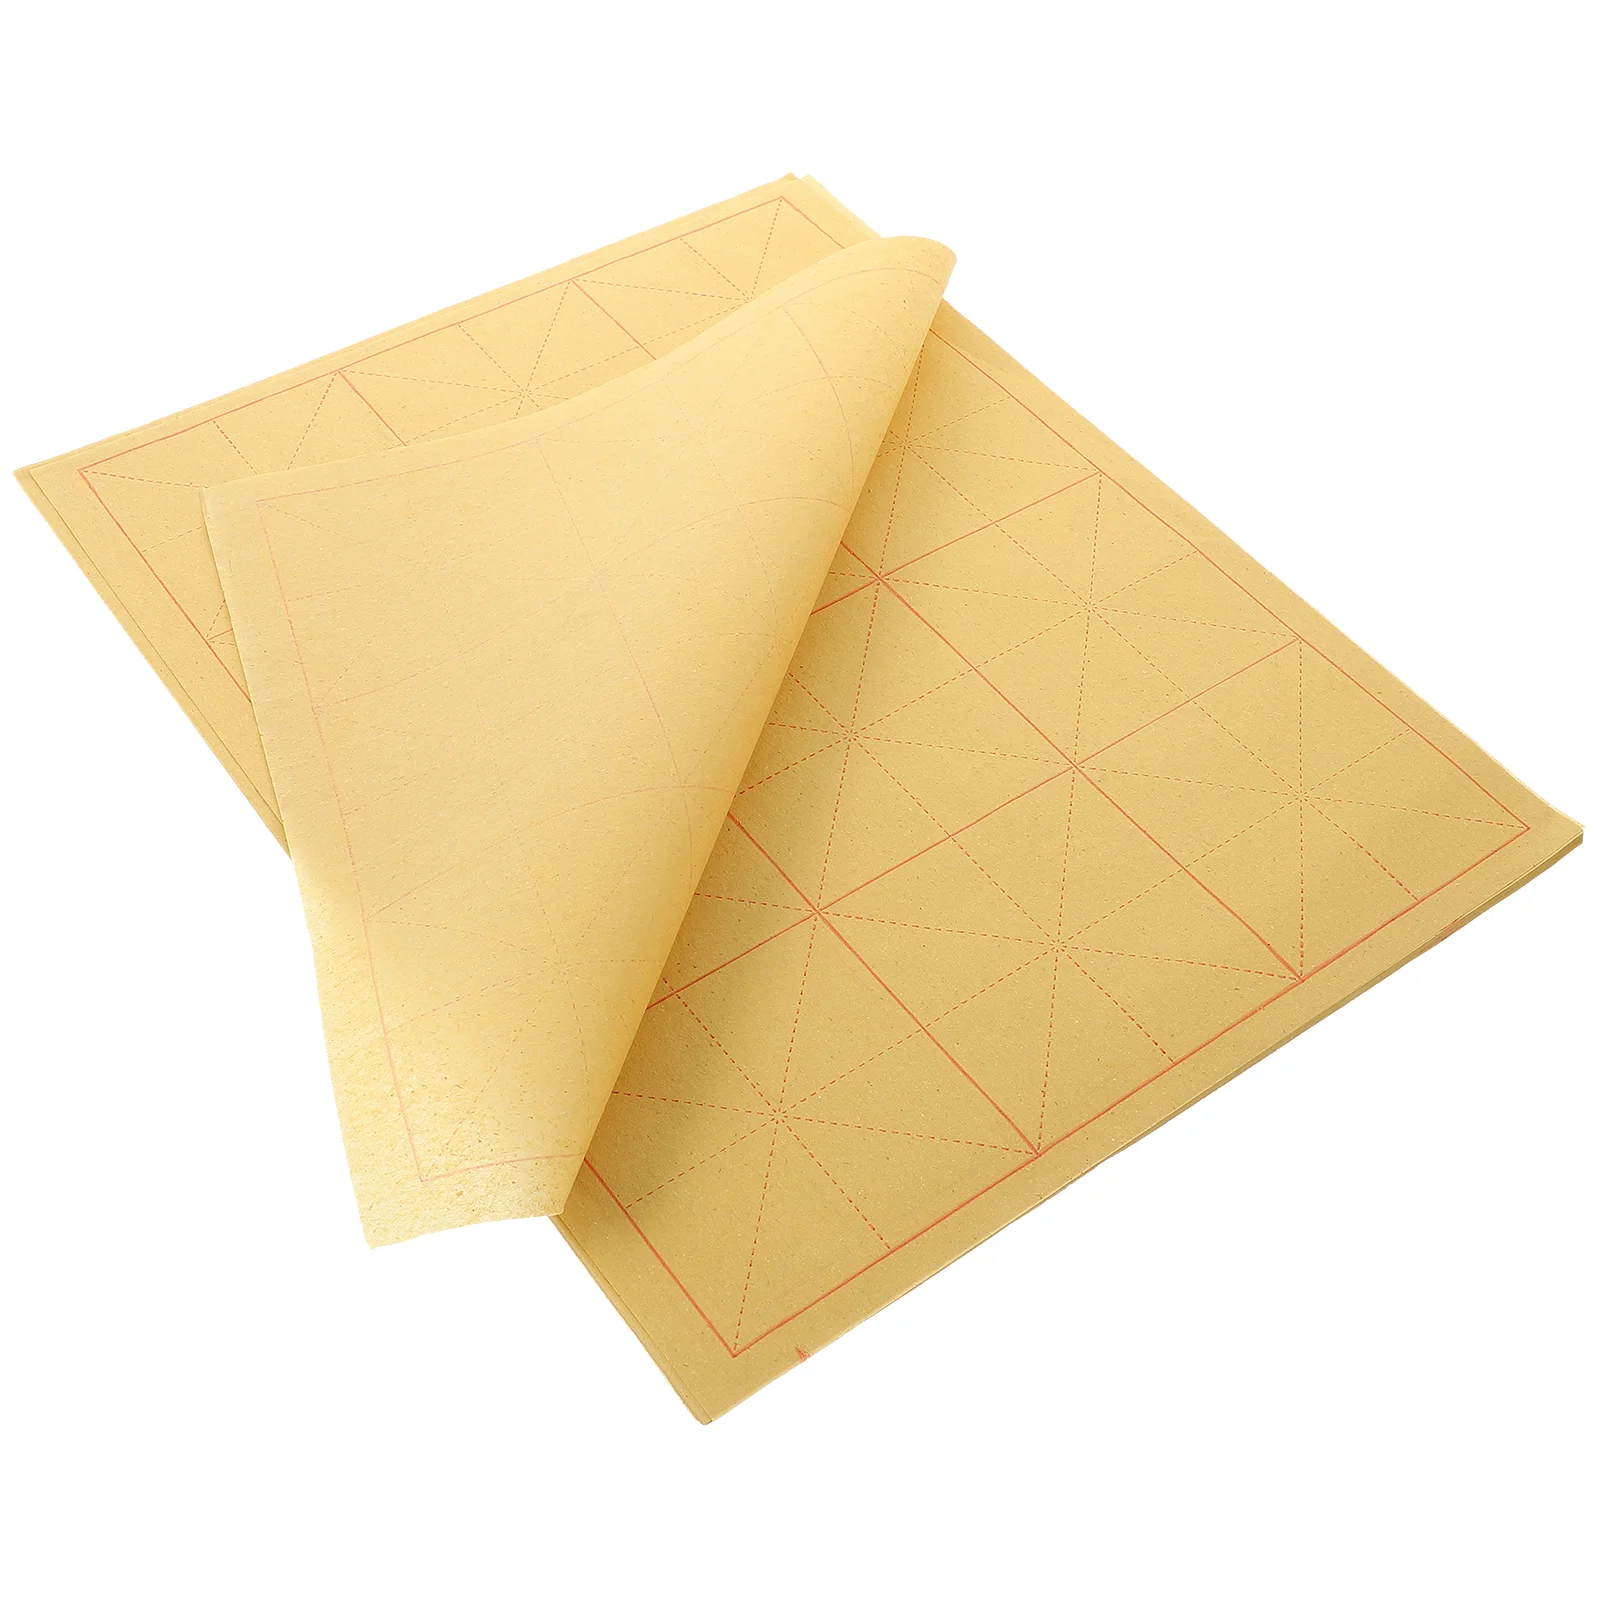 

80 Sheets Specialty Tools Chinese Character Writing Paper Calligraphy Practice Rice Ma Lian Raw Practical Xuan Student